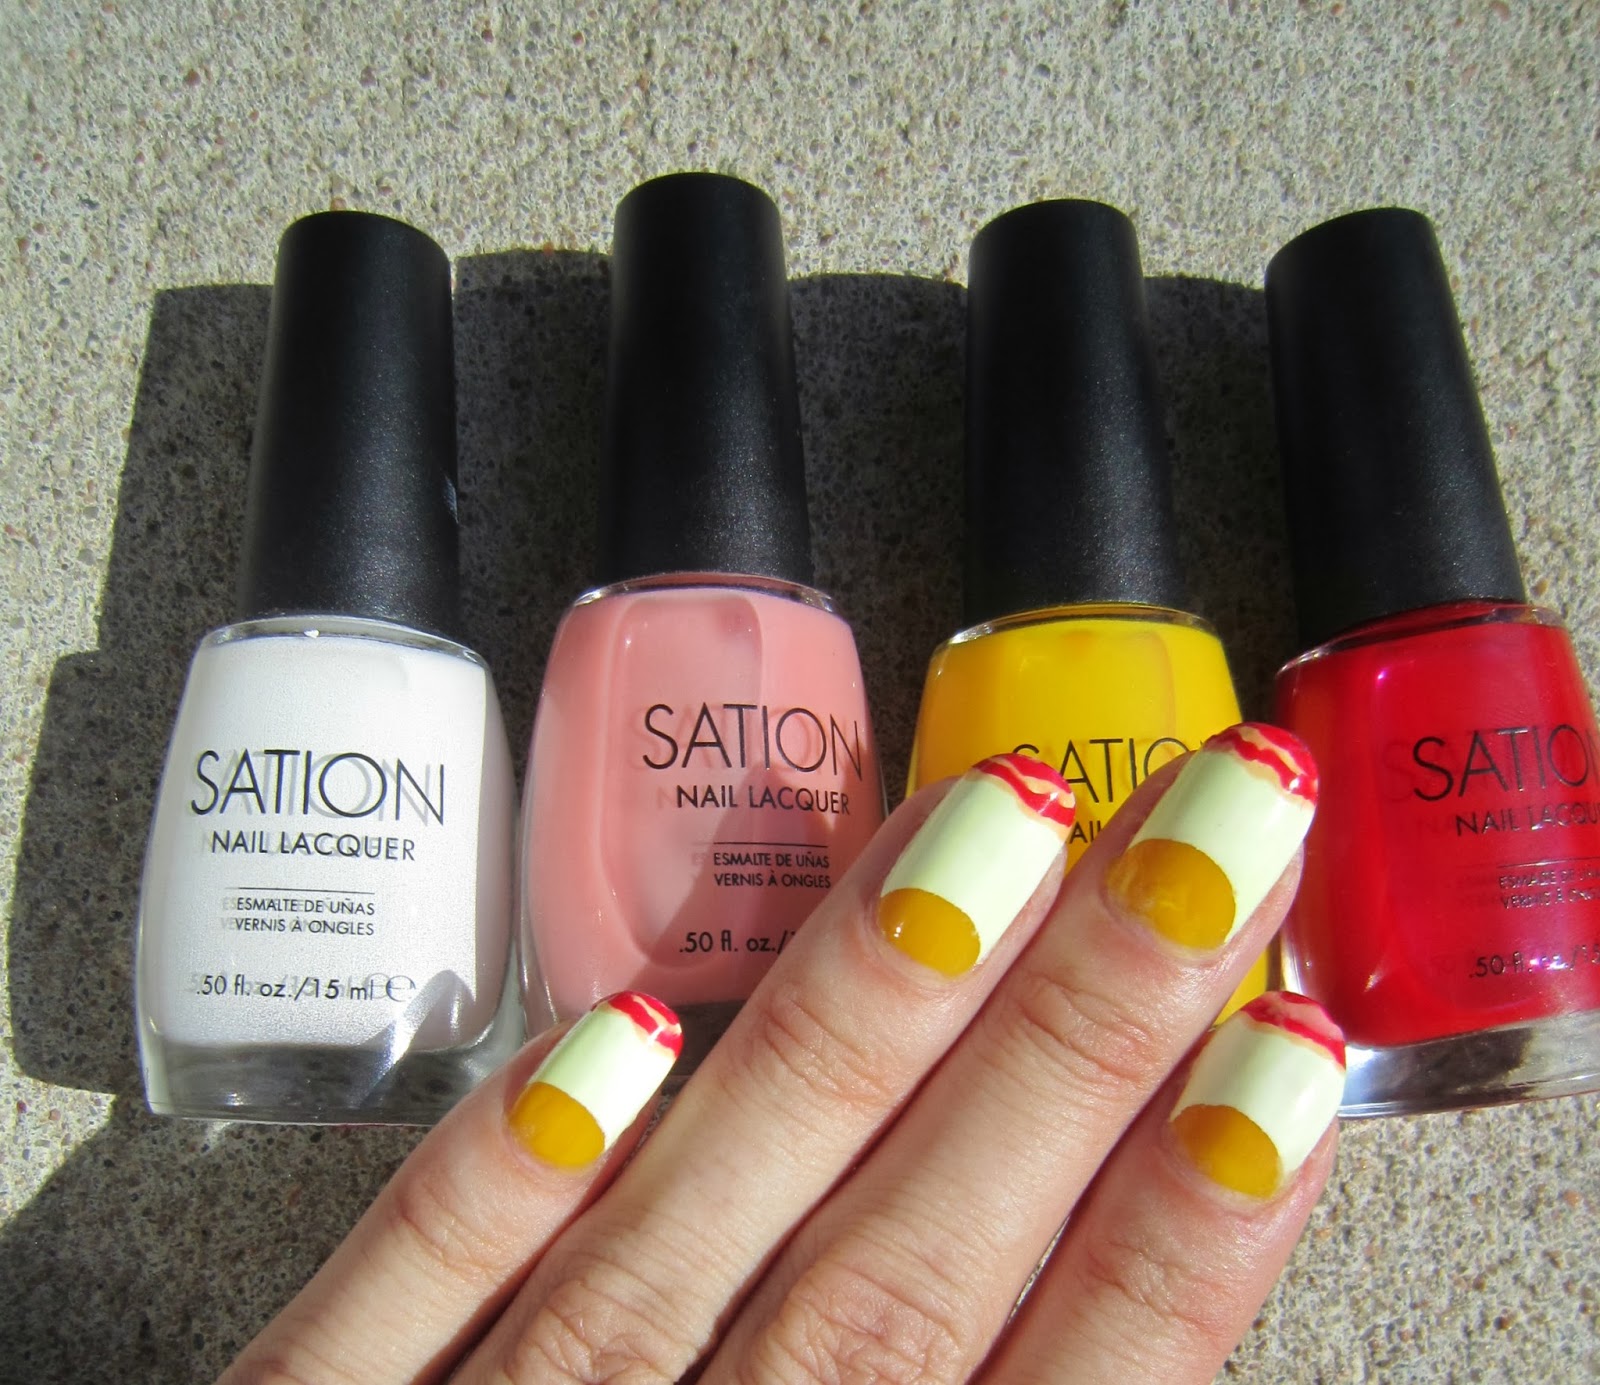 Concrete and Nail Polish: Bacon & Eggs With Sation